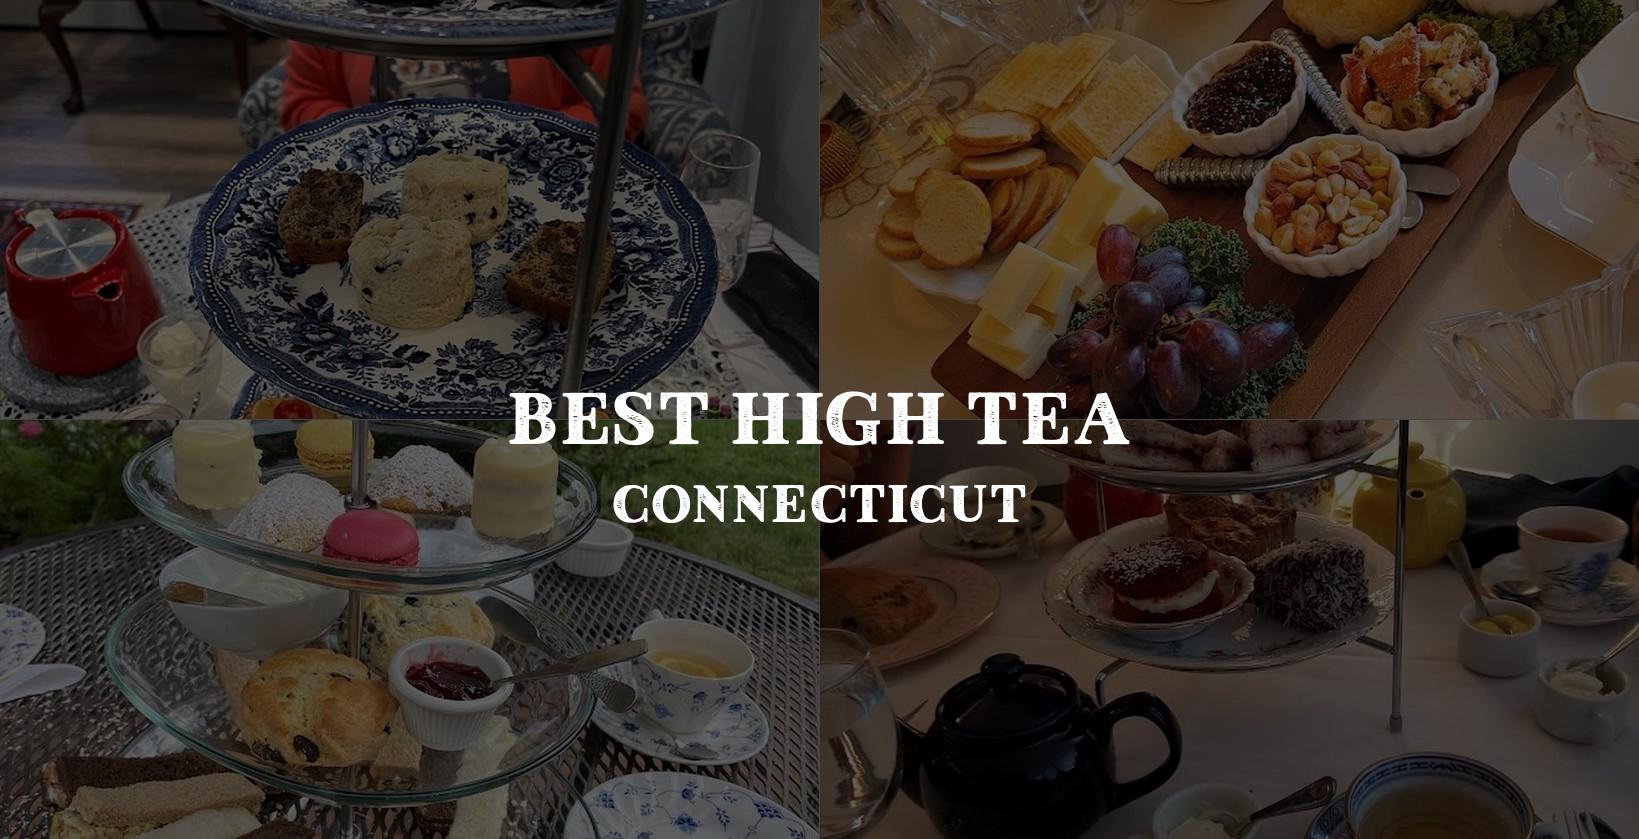 Choosing the perfect spot for high tea in Connecticut